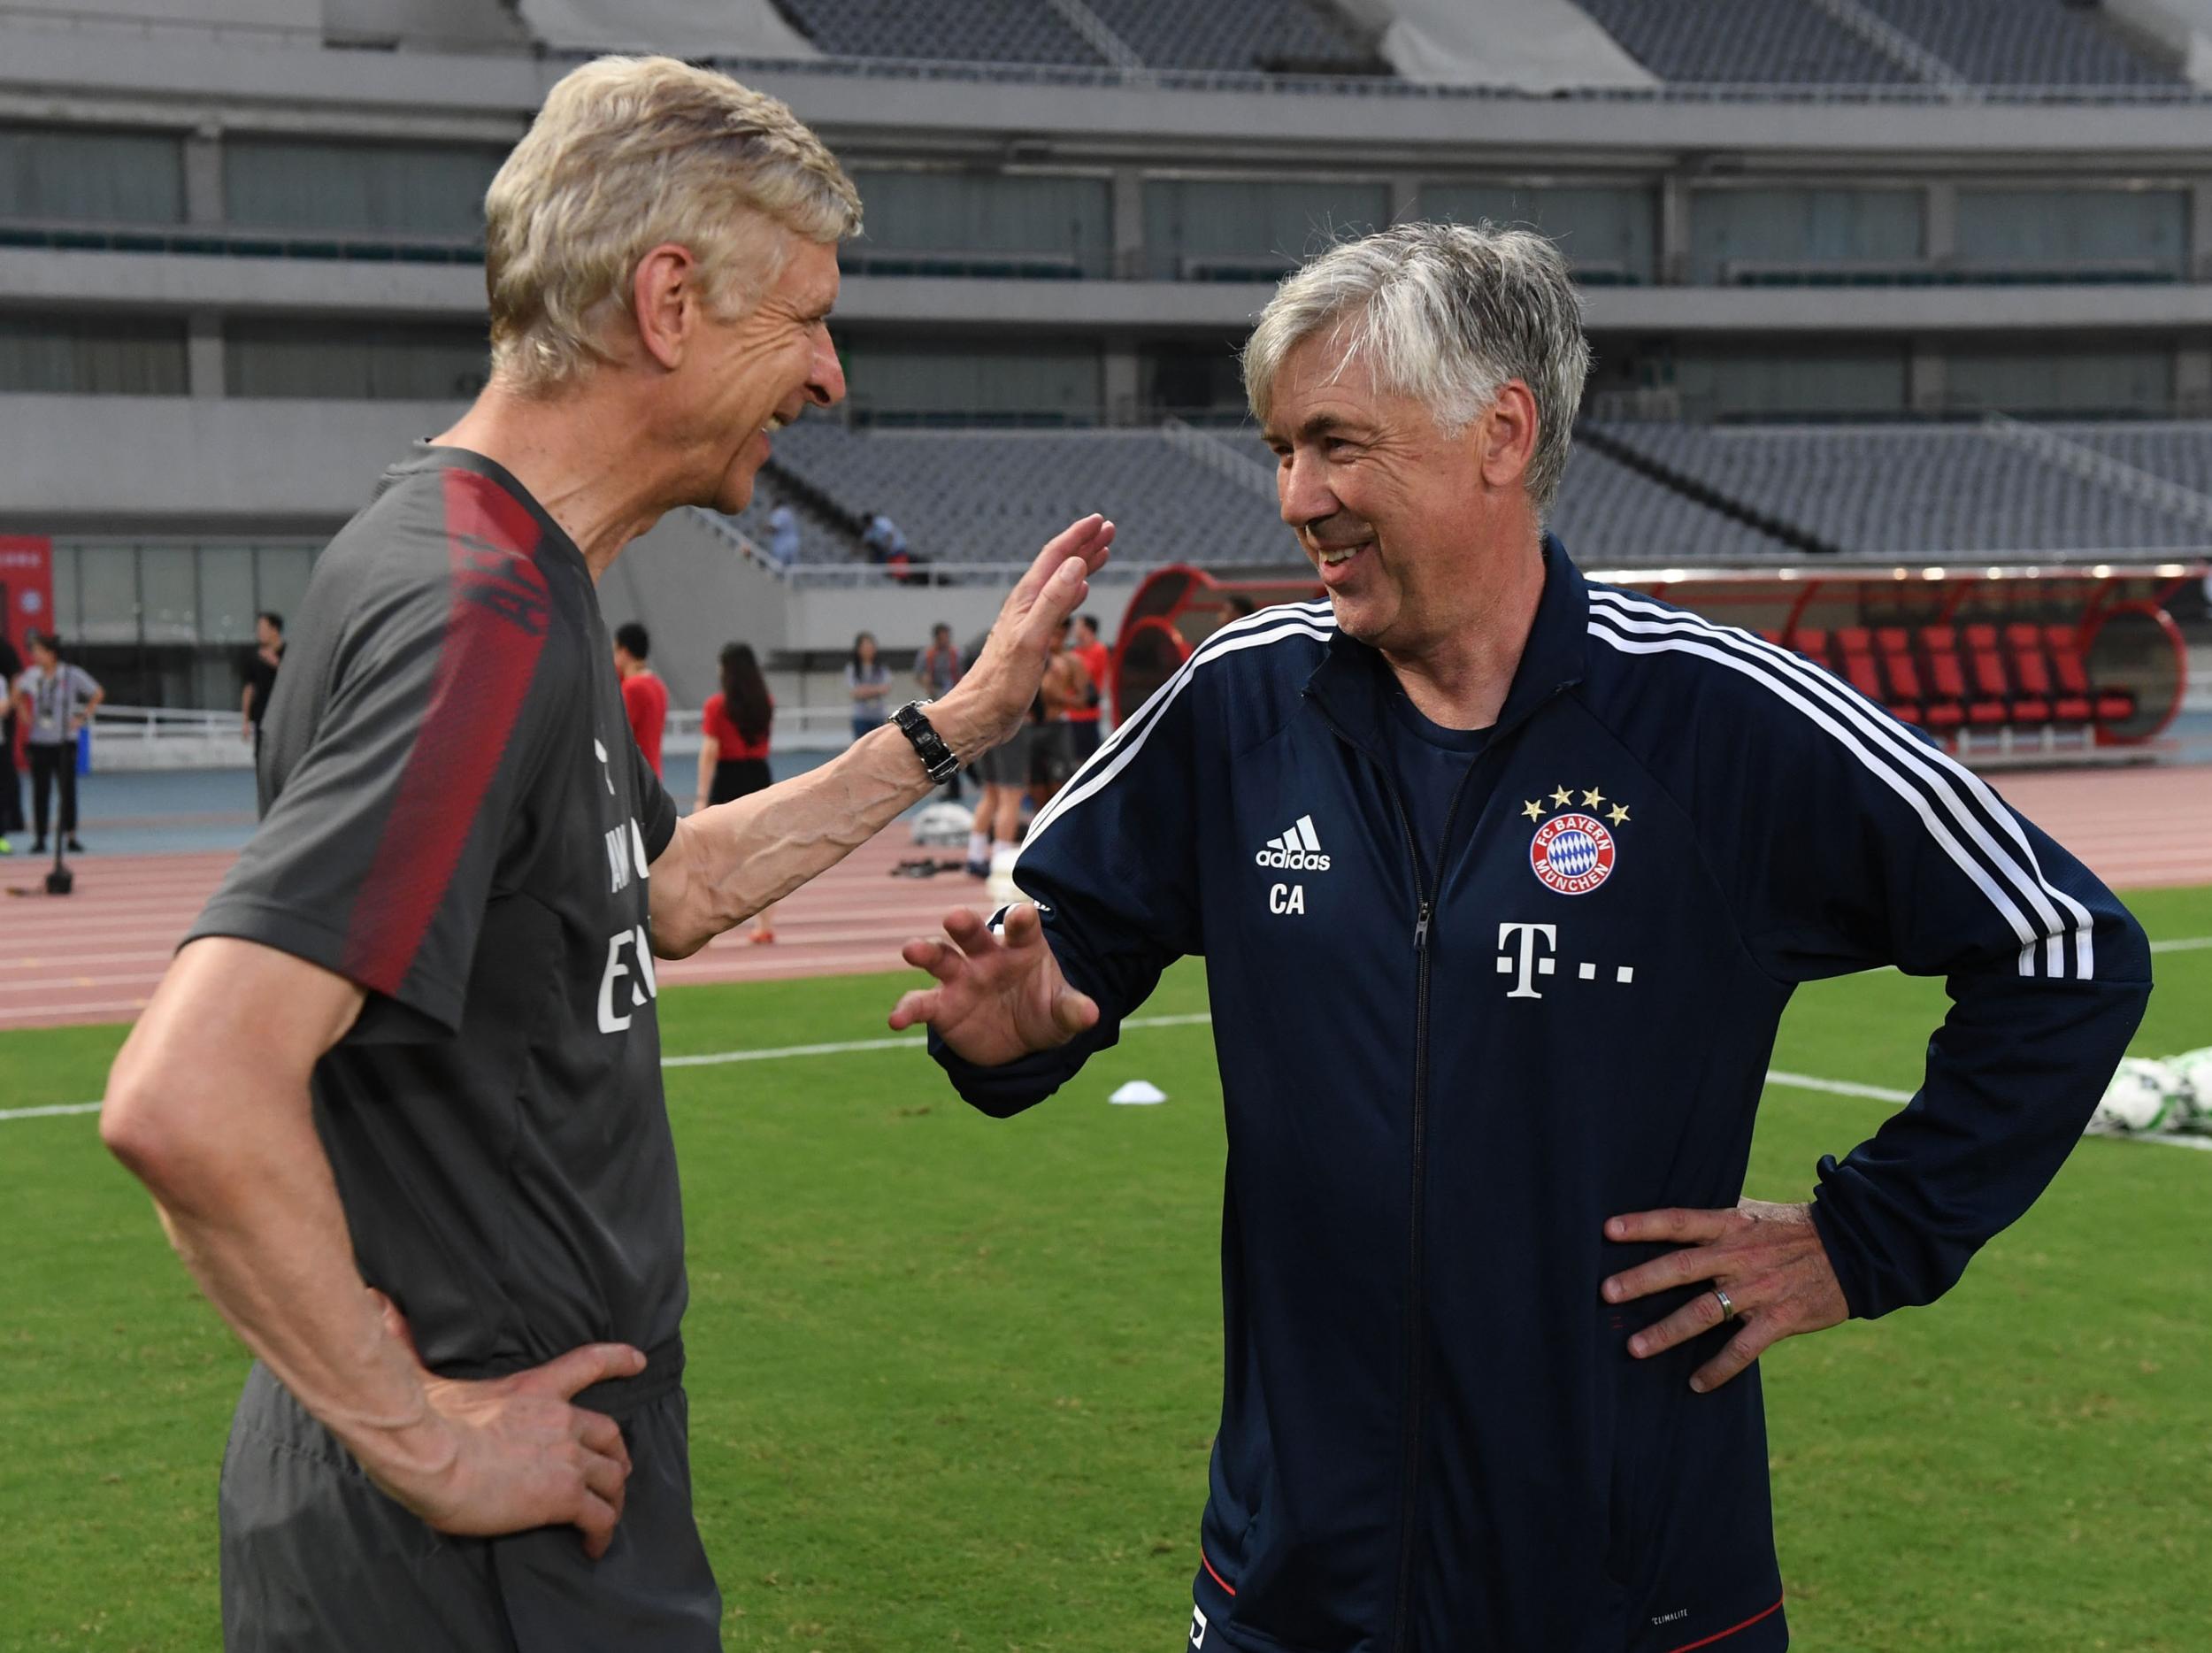 Arsenal and Bayern Munich go head to head in a friendly on Wednesday